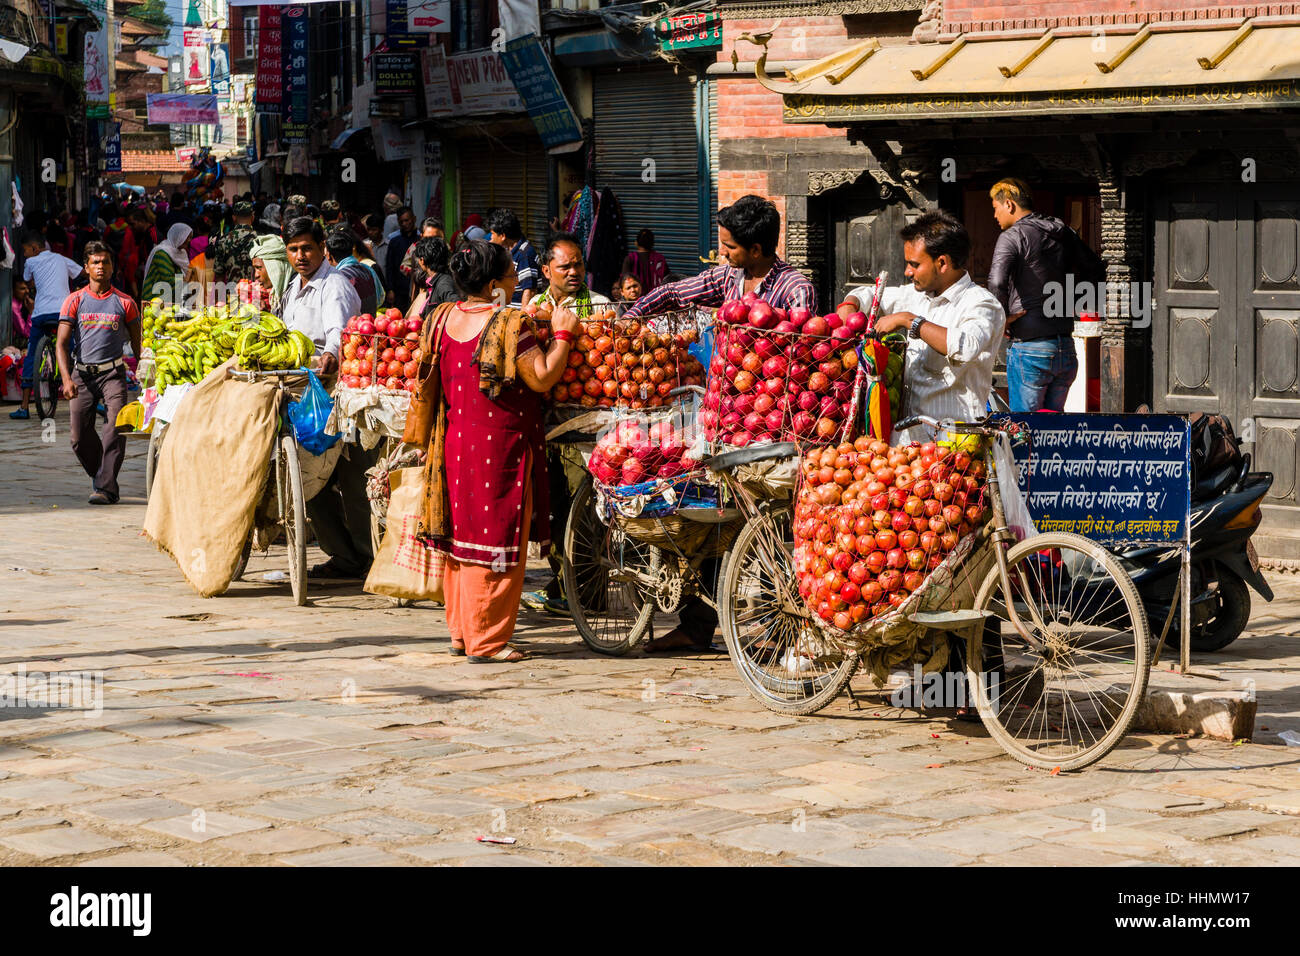 Fruit sellers, using bicycles, are offering apples and oranges on Indra Chowk market square, Kathmandu, Kathmandu District Stock Photo